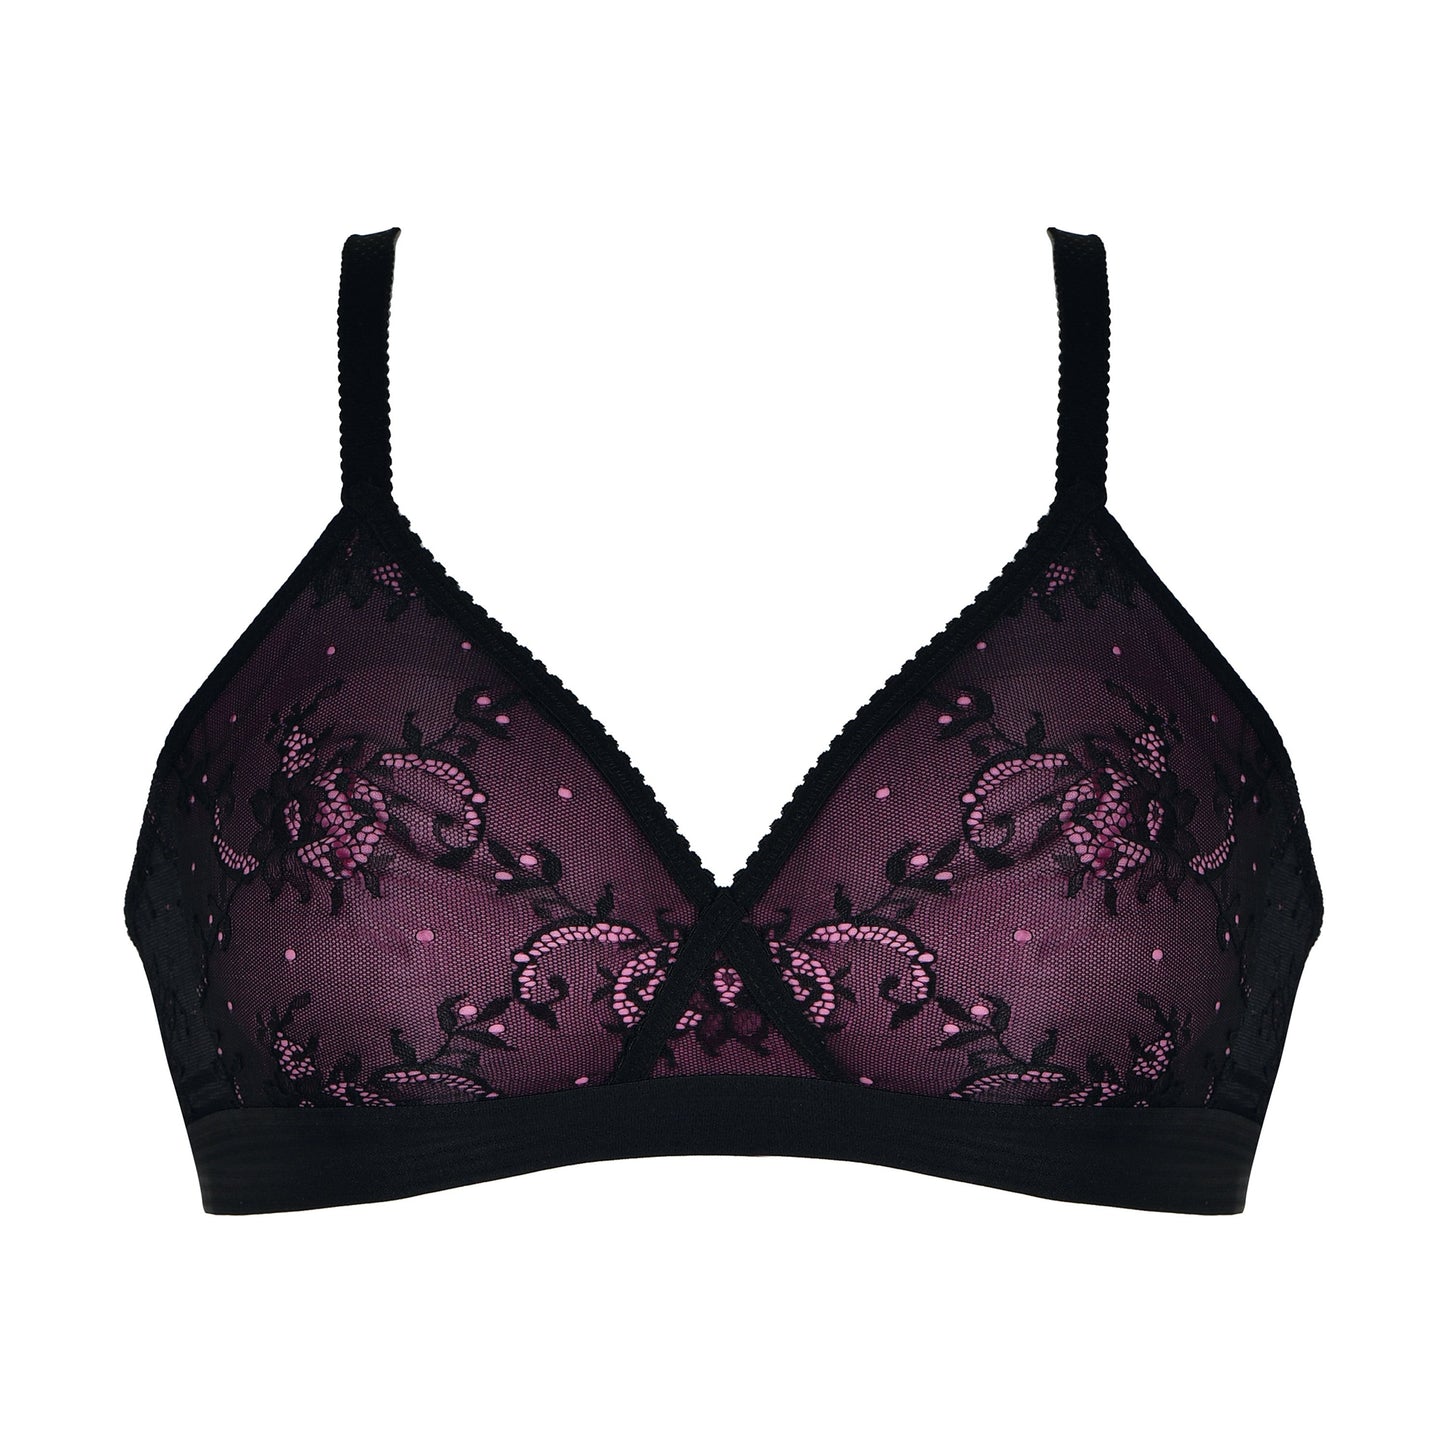 Soft Bra by Naturana in Purple Lace | Mastectomy Bras